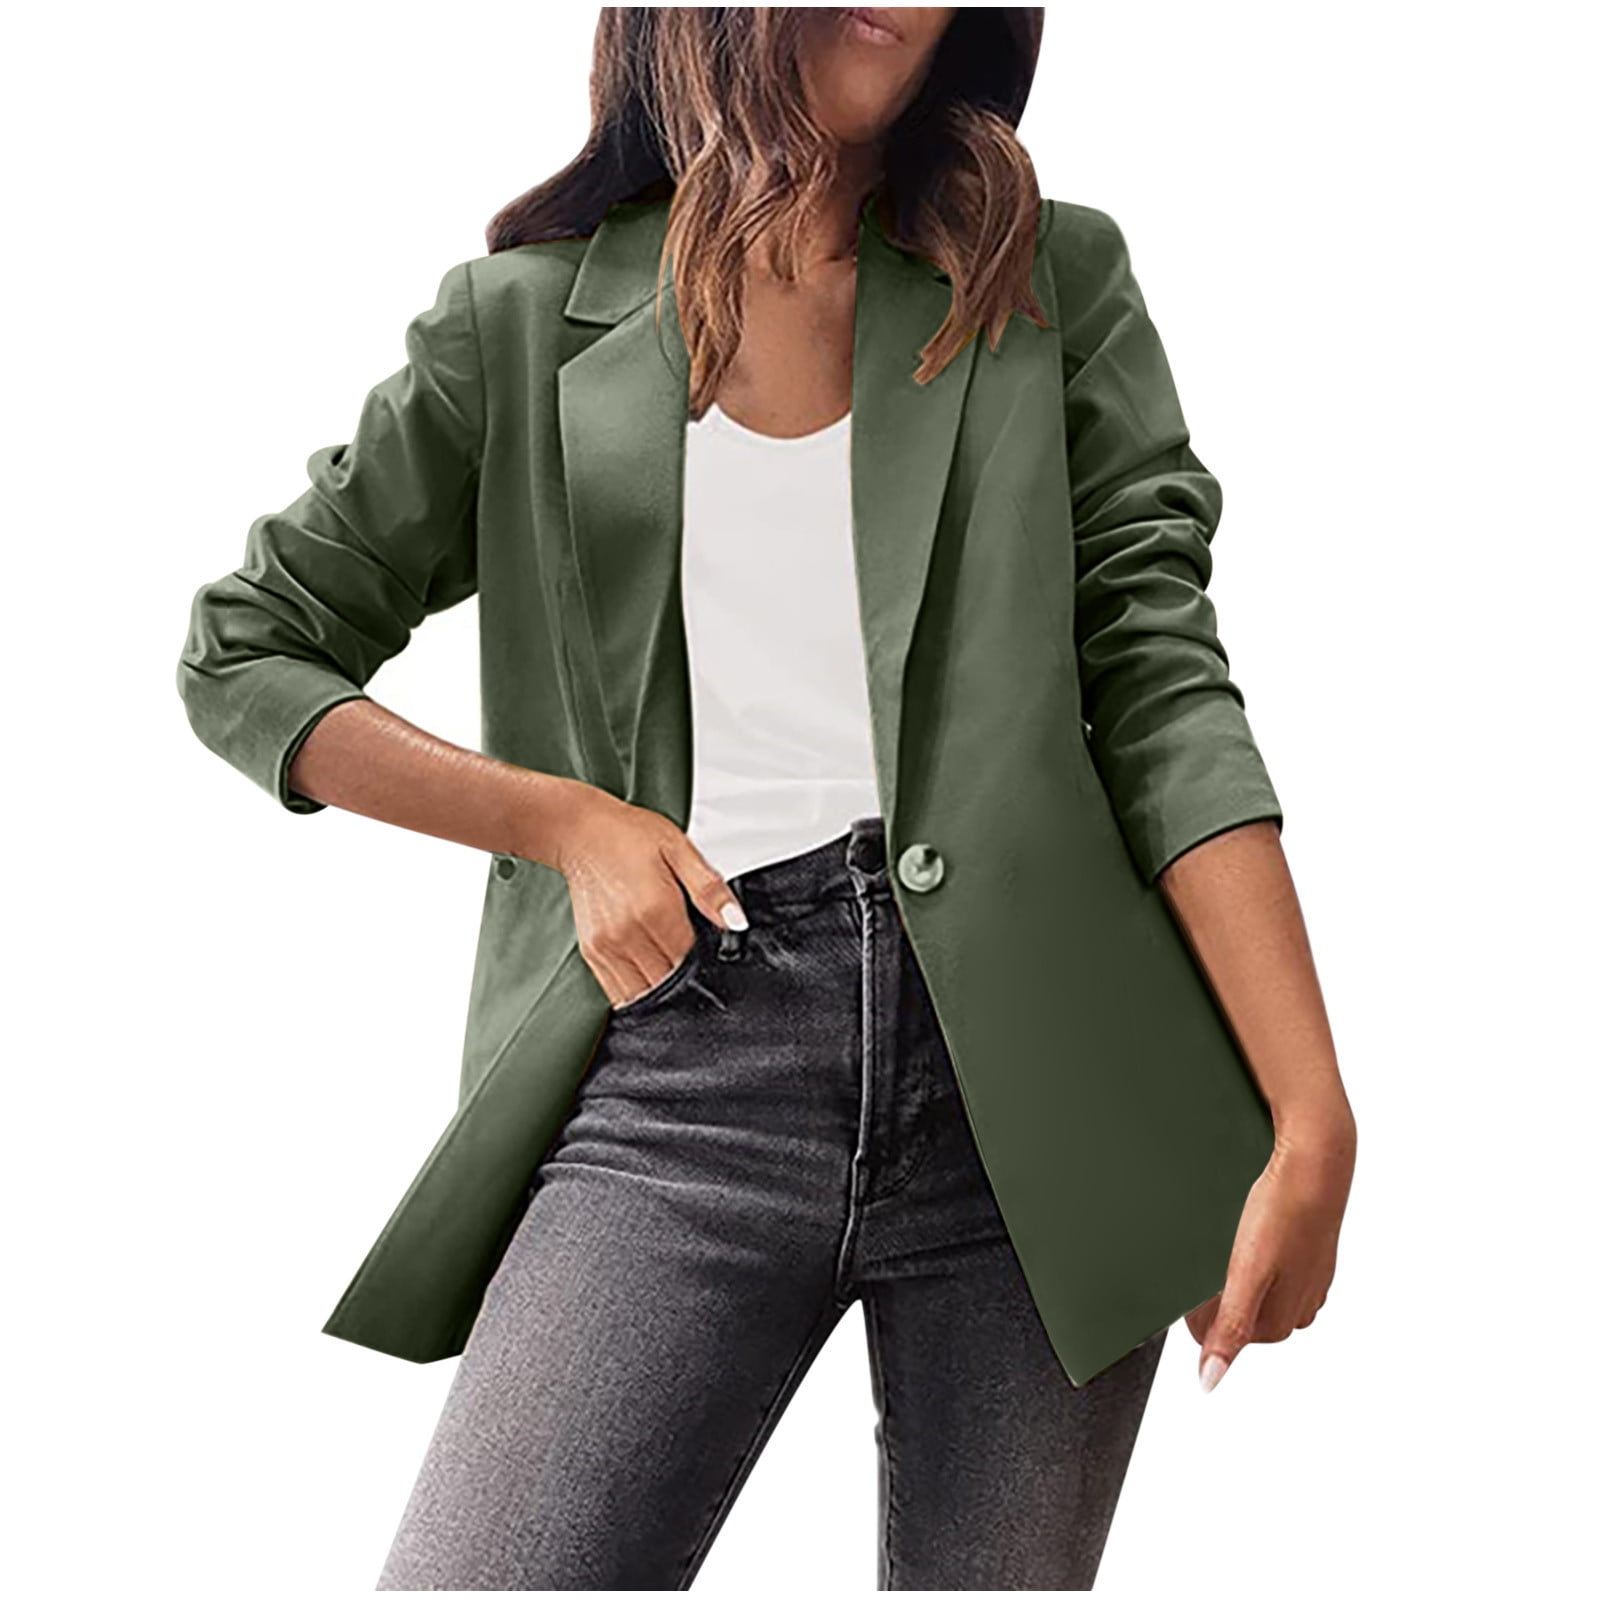 HAPIMO Discount Suit Jacket for Women Girls Fall Fashion Tops Womens ...